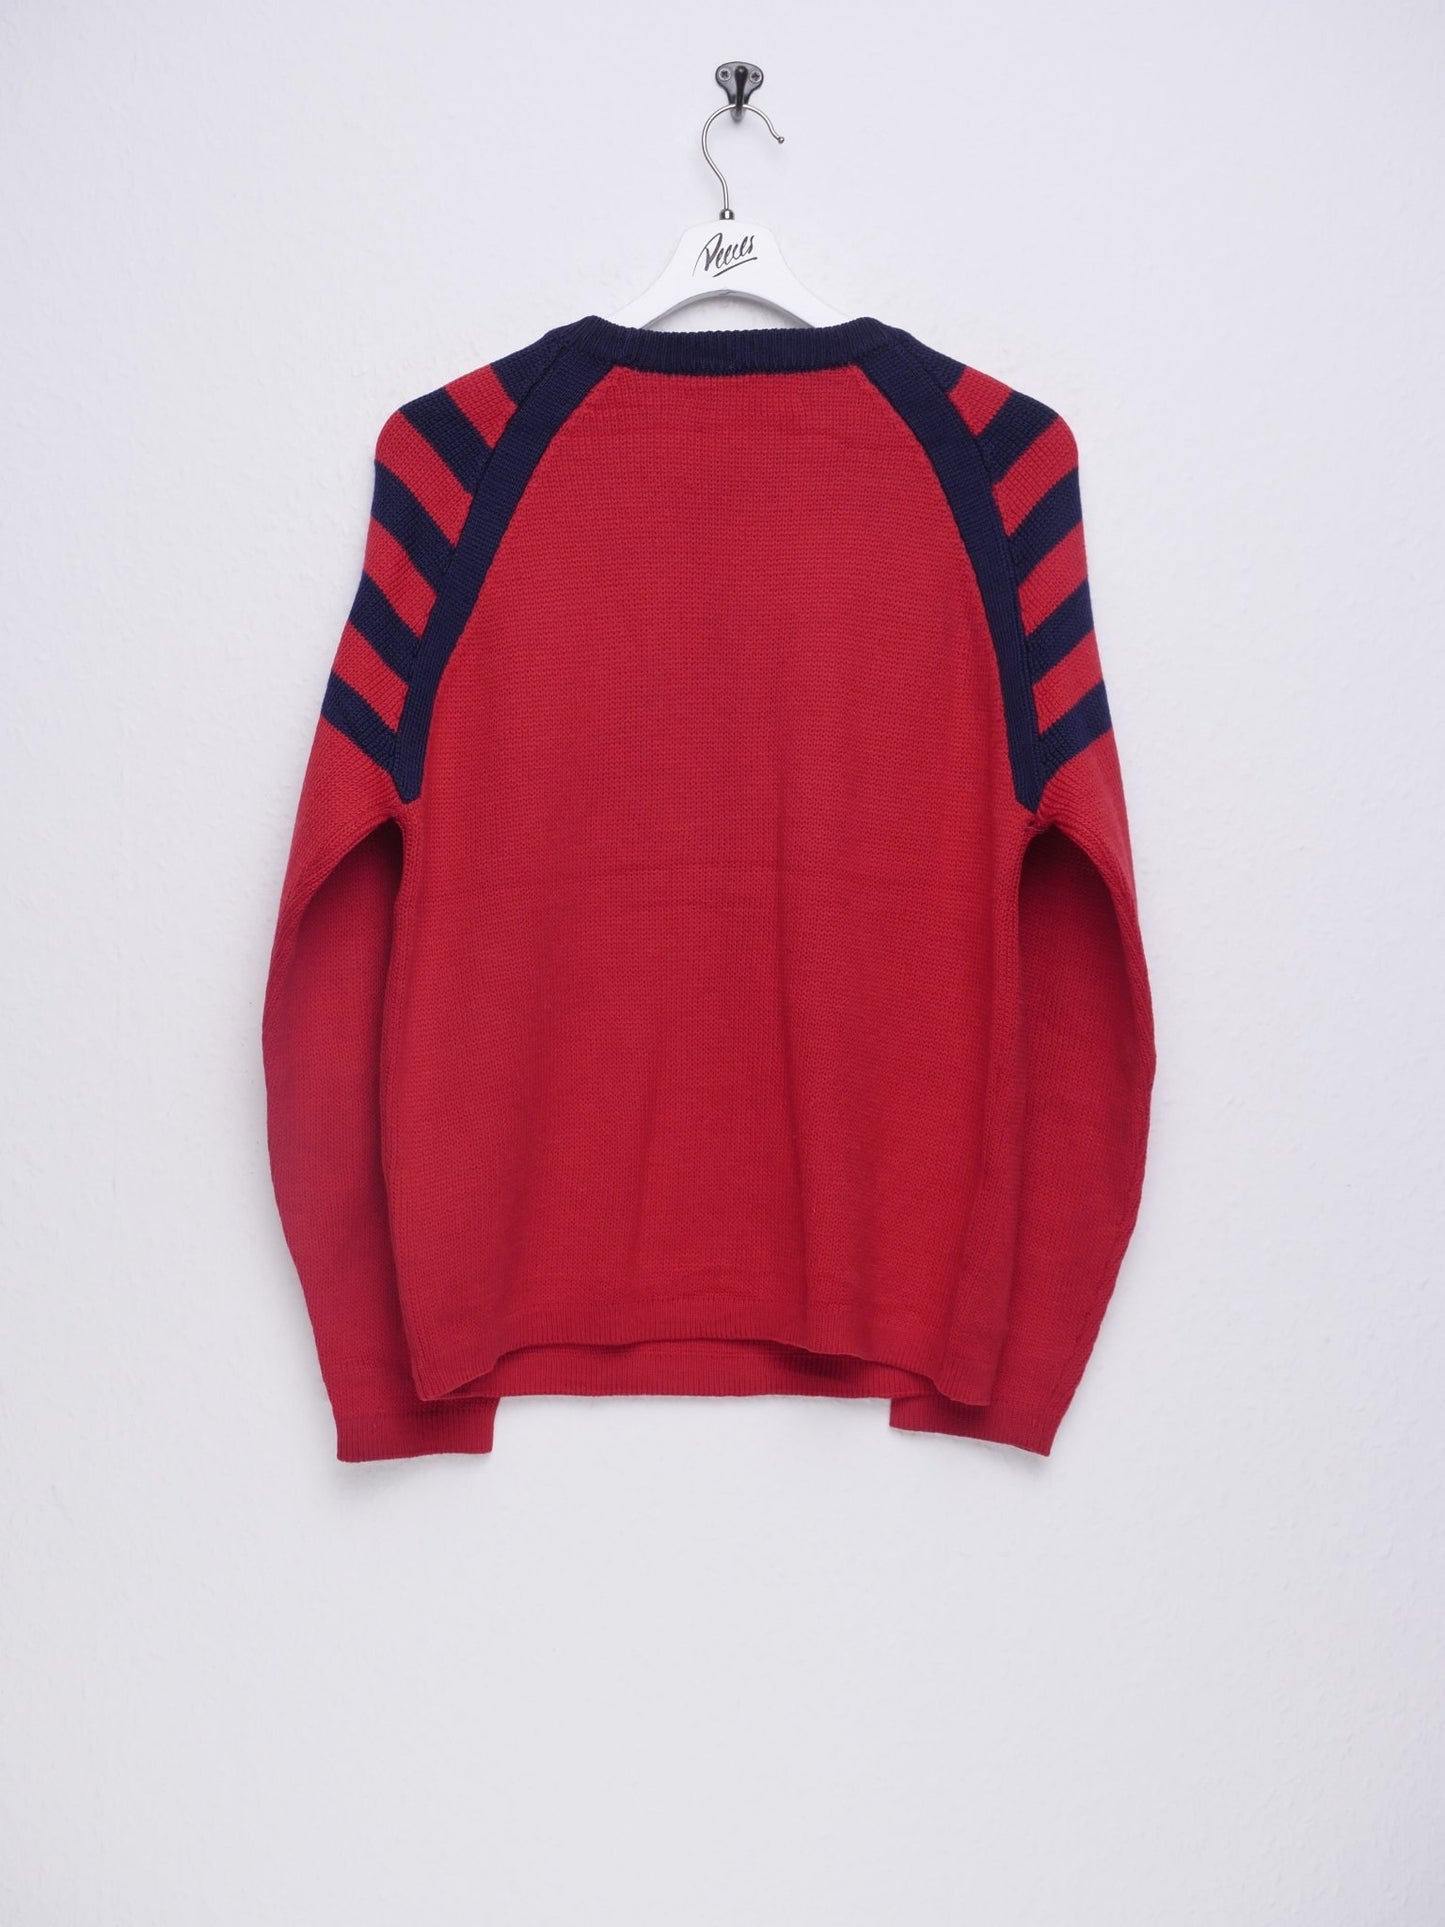 Vintage two toned knit Sweater - Peeces